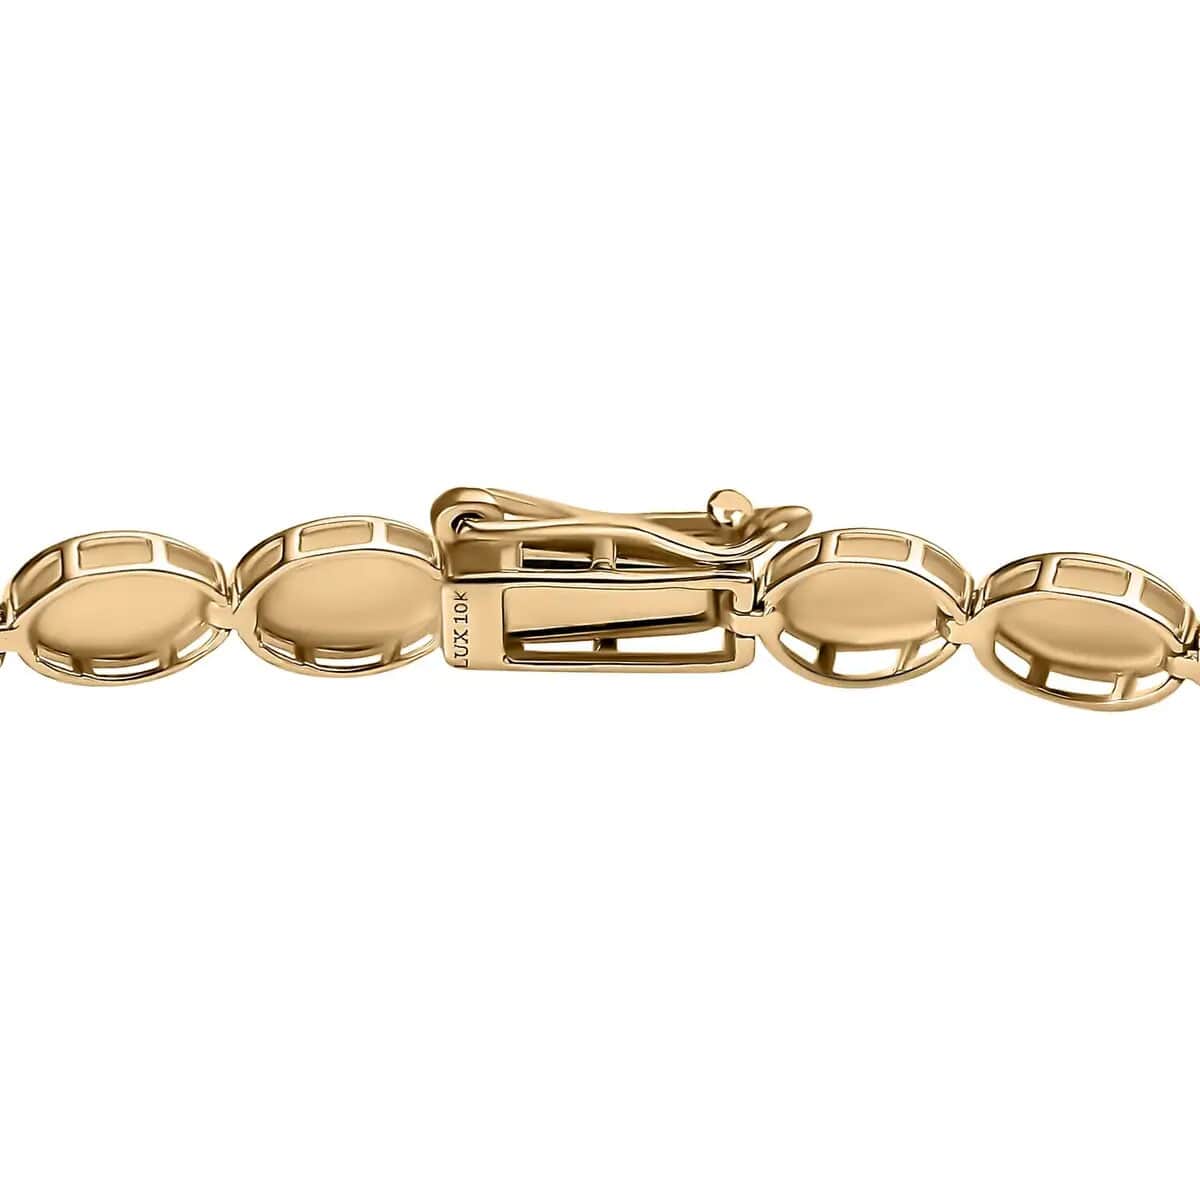 Luxoro 10K Yellow Gold Bracelet,  Oval Link Bracelet, Gold Link Bracelet, Gold Bracelet For Her, Gold Jewelry For Her (7.25 In) 3.8 Grams image number 4